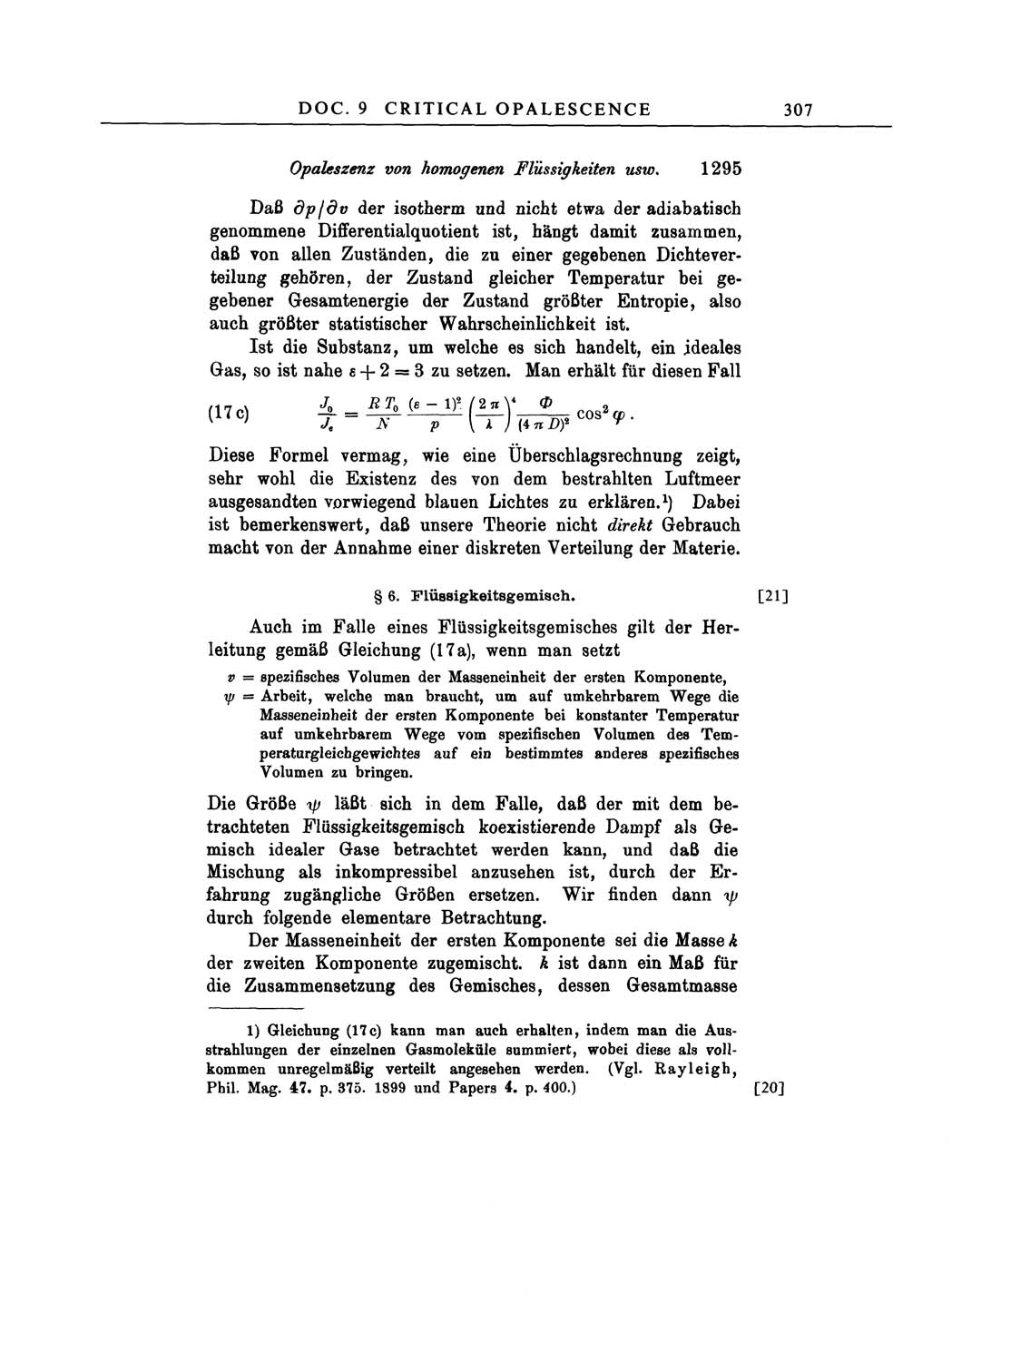 Volume 3: The Swiss Years: Writings 1909-1911 page 307